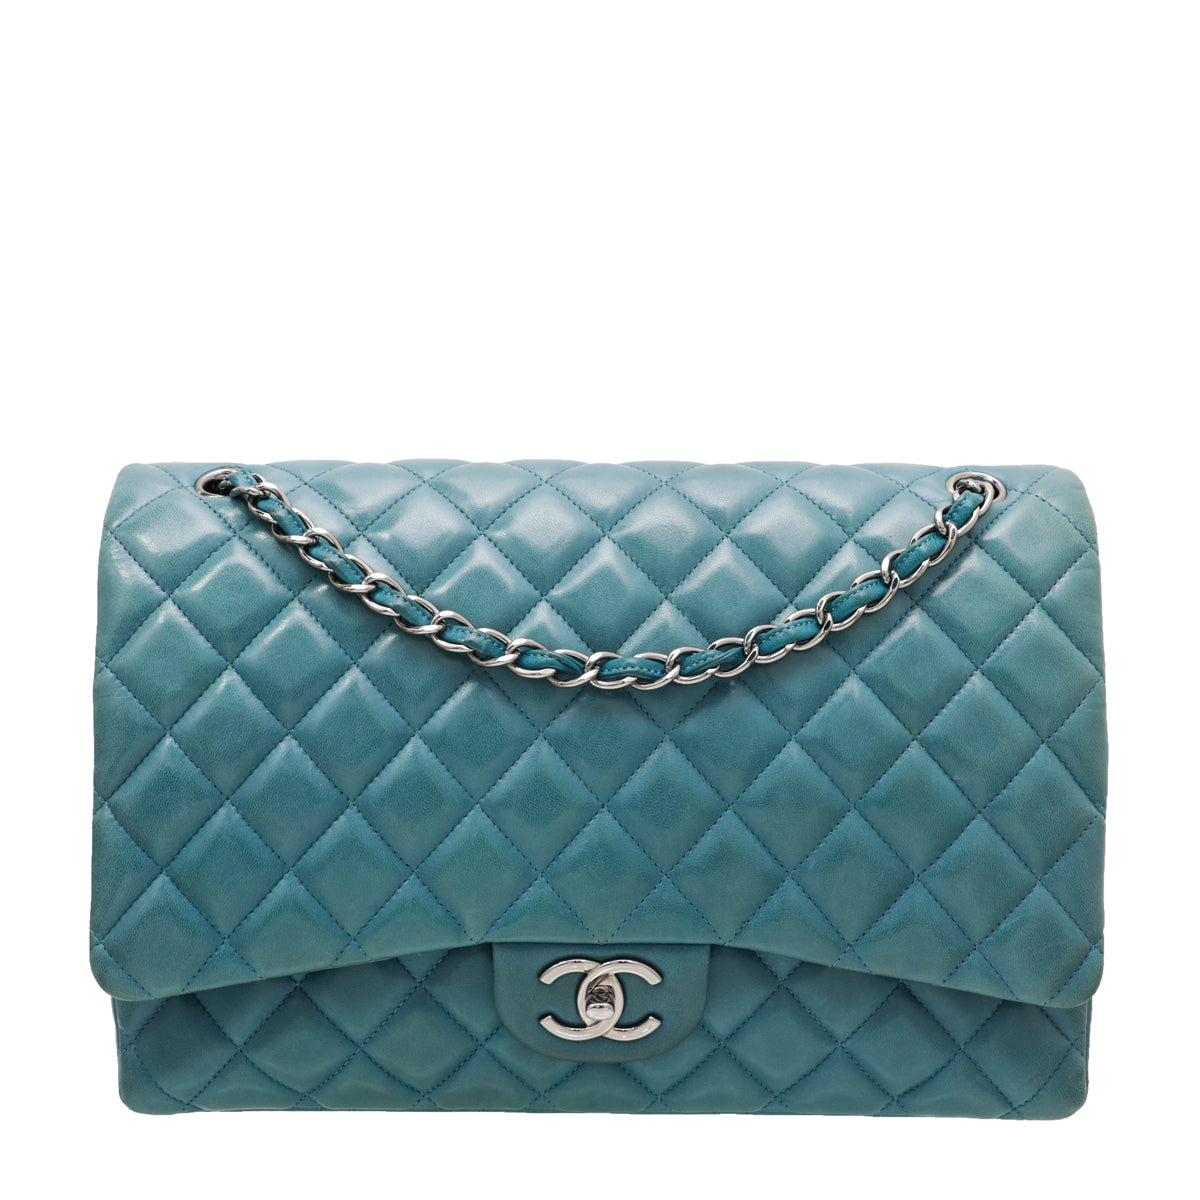 Chanel Teal Green Classic Double Flap Bag